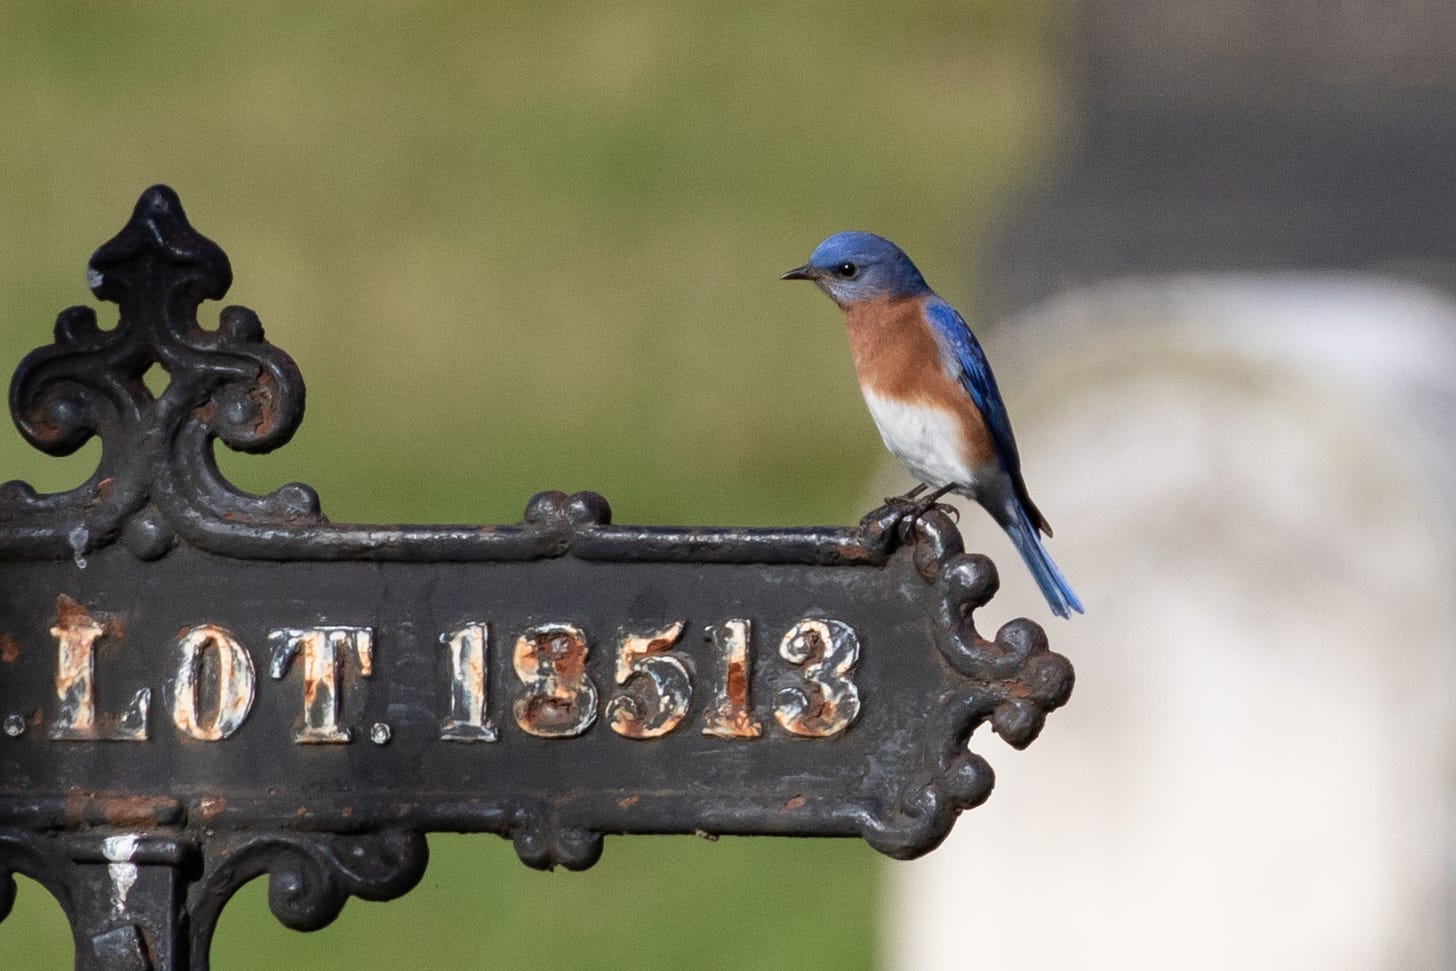 a bright blue bird with a rusty breast and white belly standing on the right side of a black ironwork sign, facing left. the left half of the sign is cut off, but you can see ".LOT. 18513" in chipping white and rusty paint. there is a blurry headstone in the background.